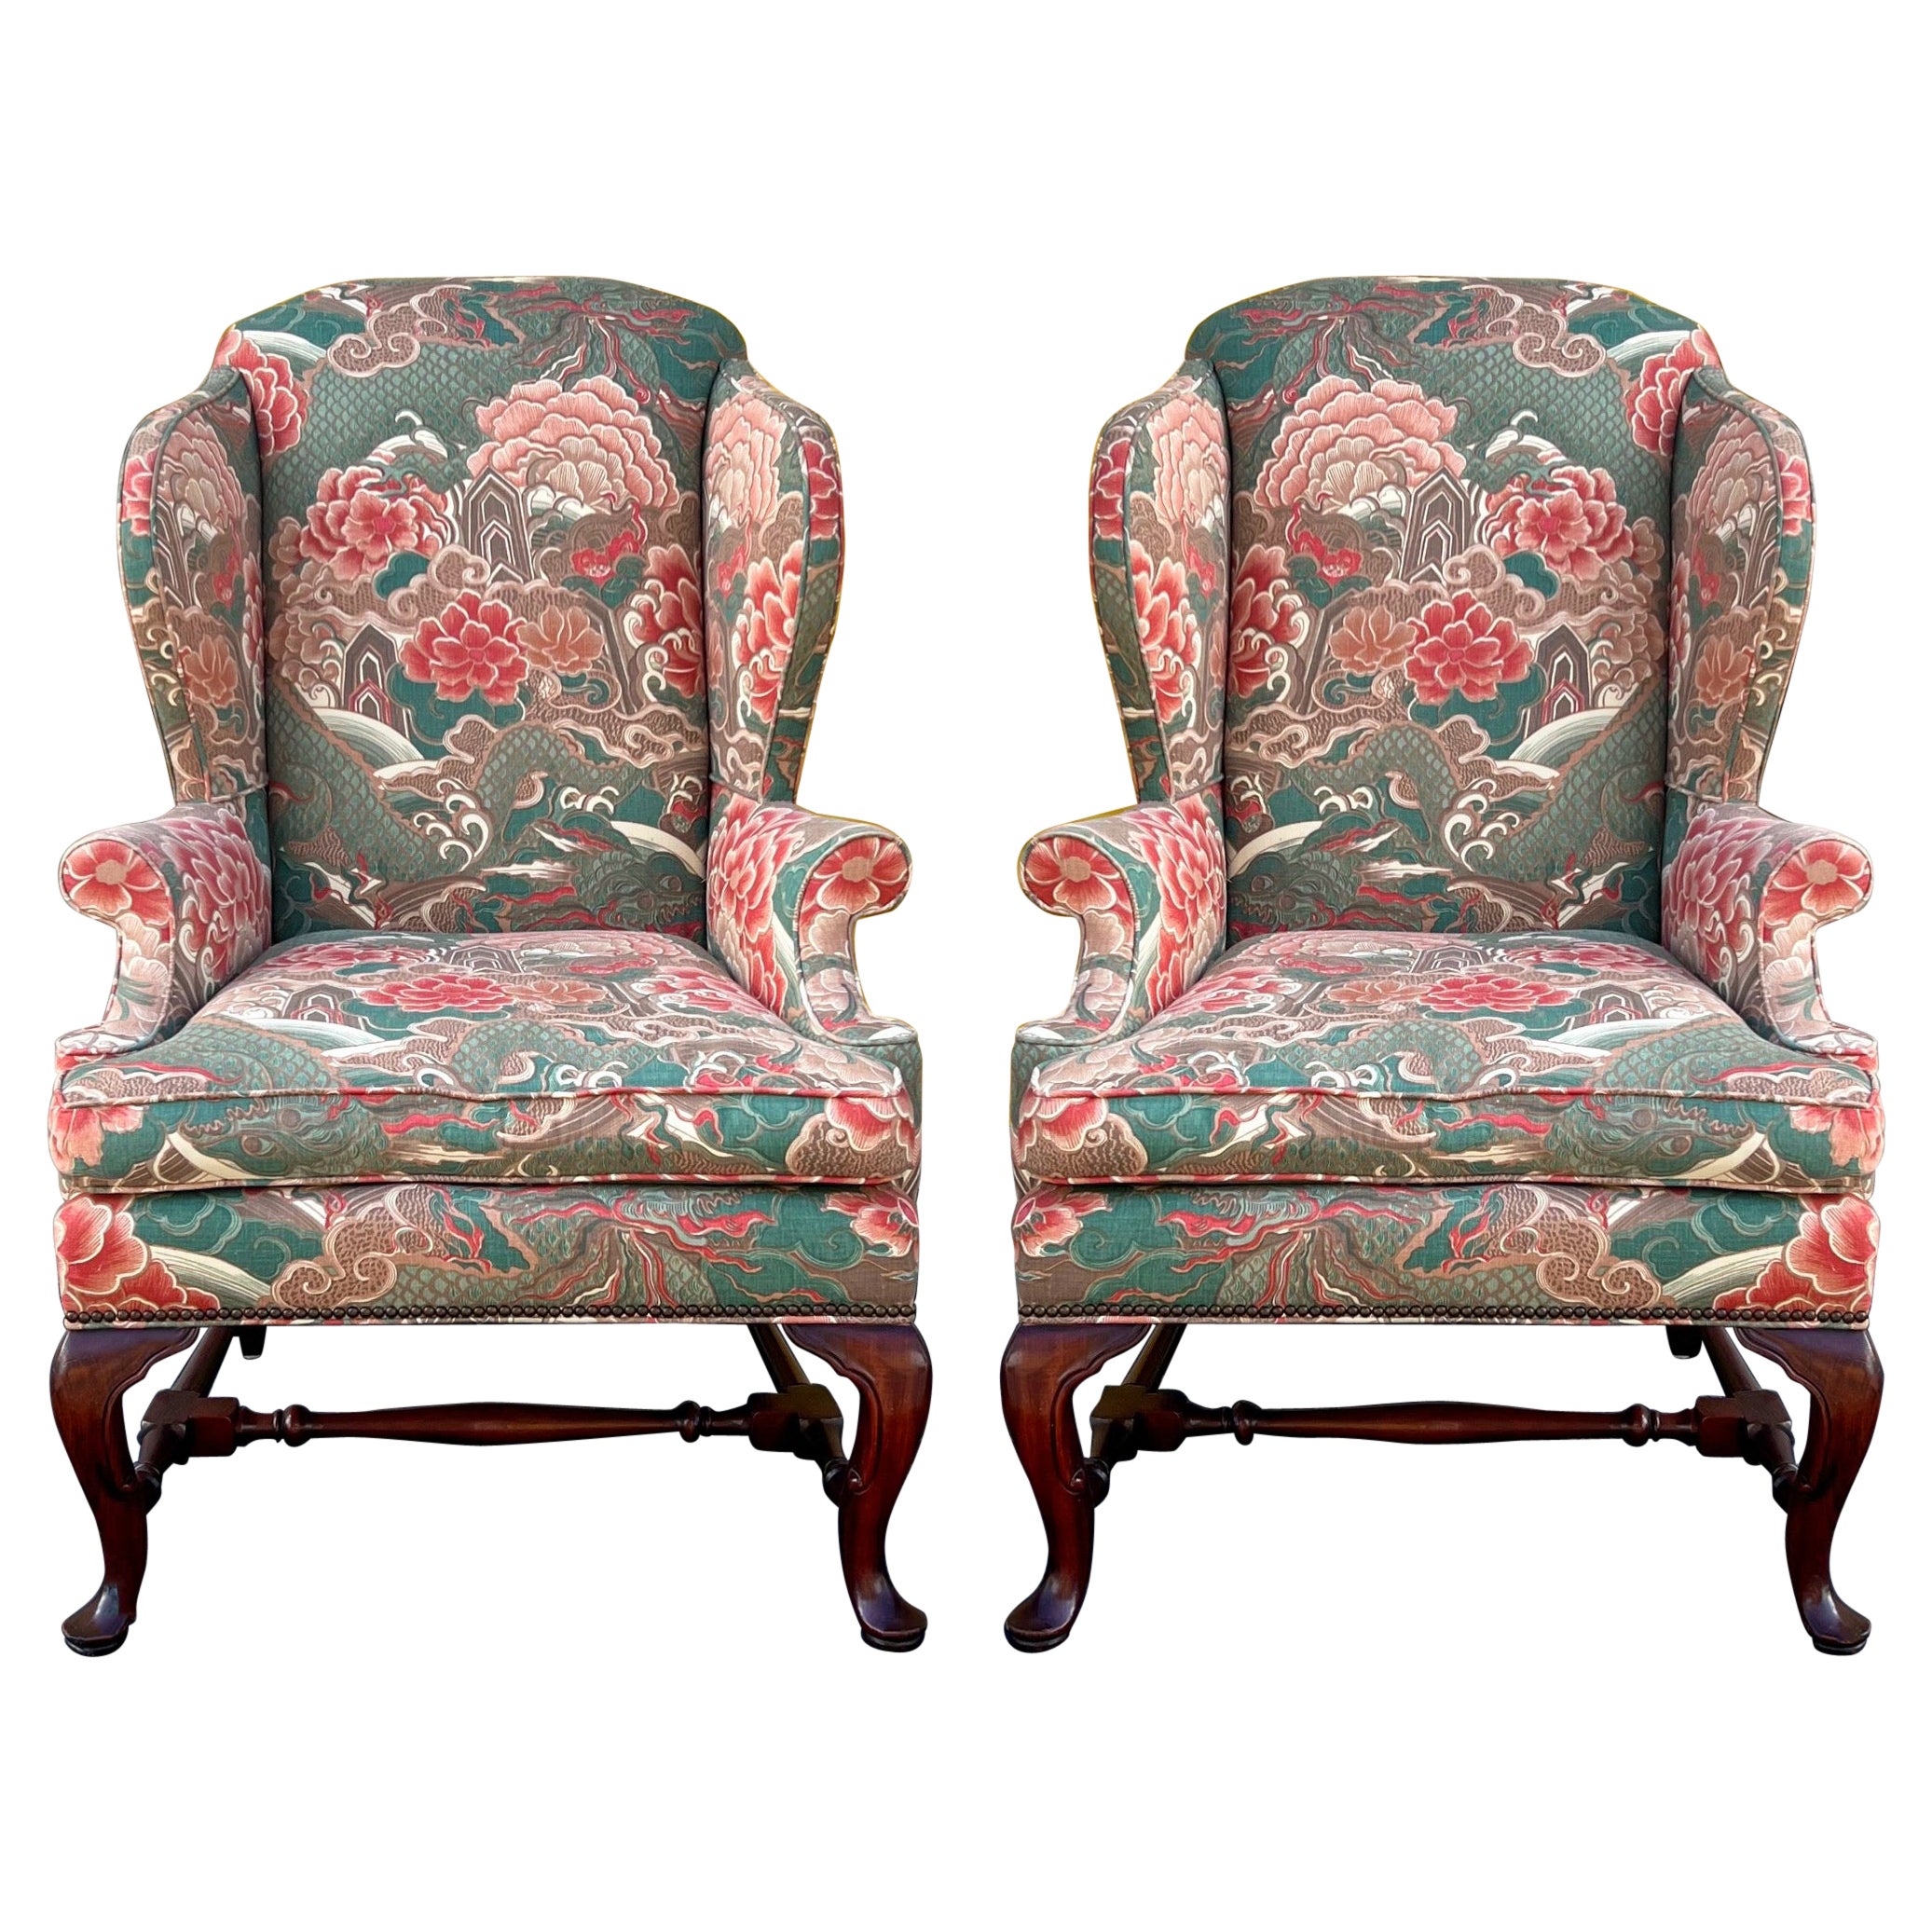 Baker Furniture Chinese Chippendale Style Mahogany Wingback Chairs, Pair